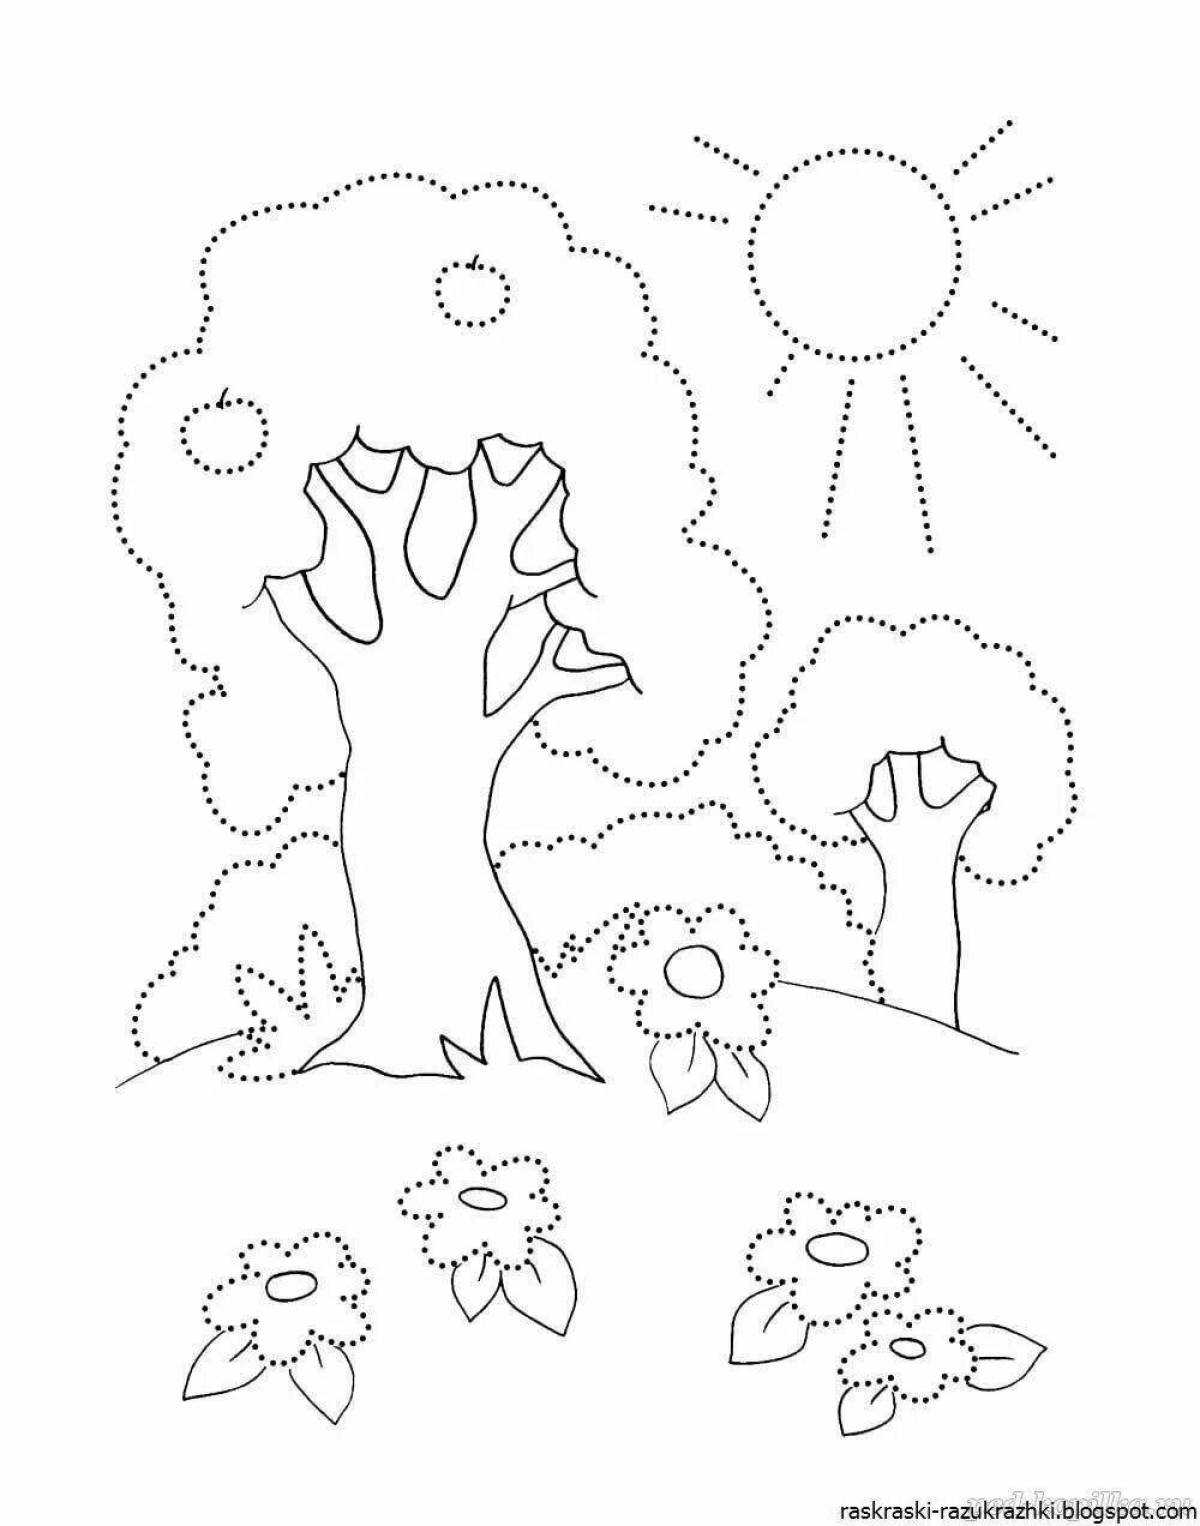 Colouring serene nature for children 3-4 years old